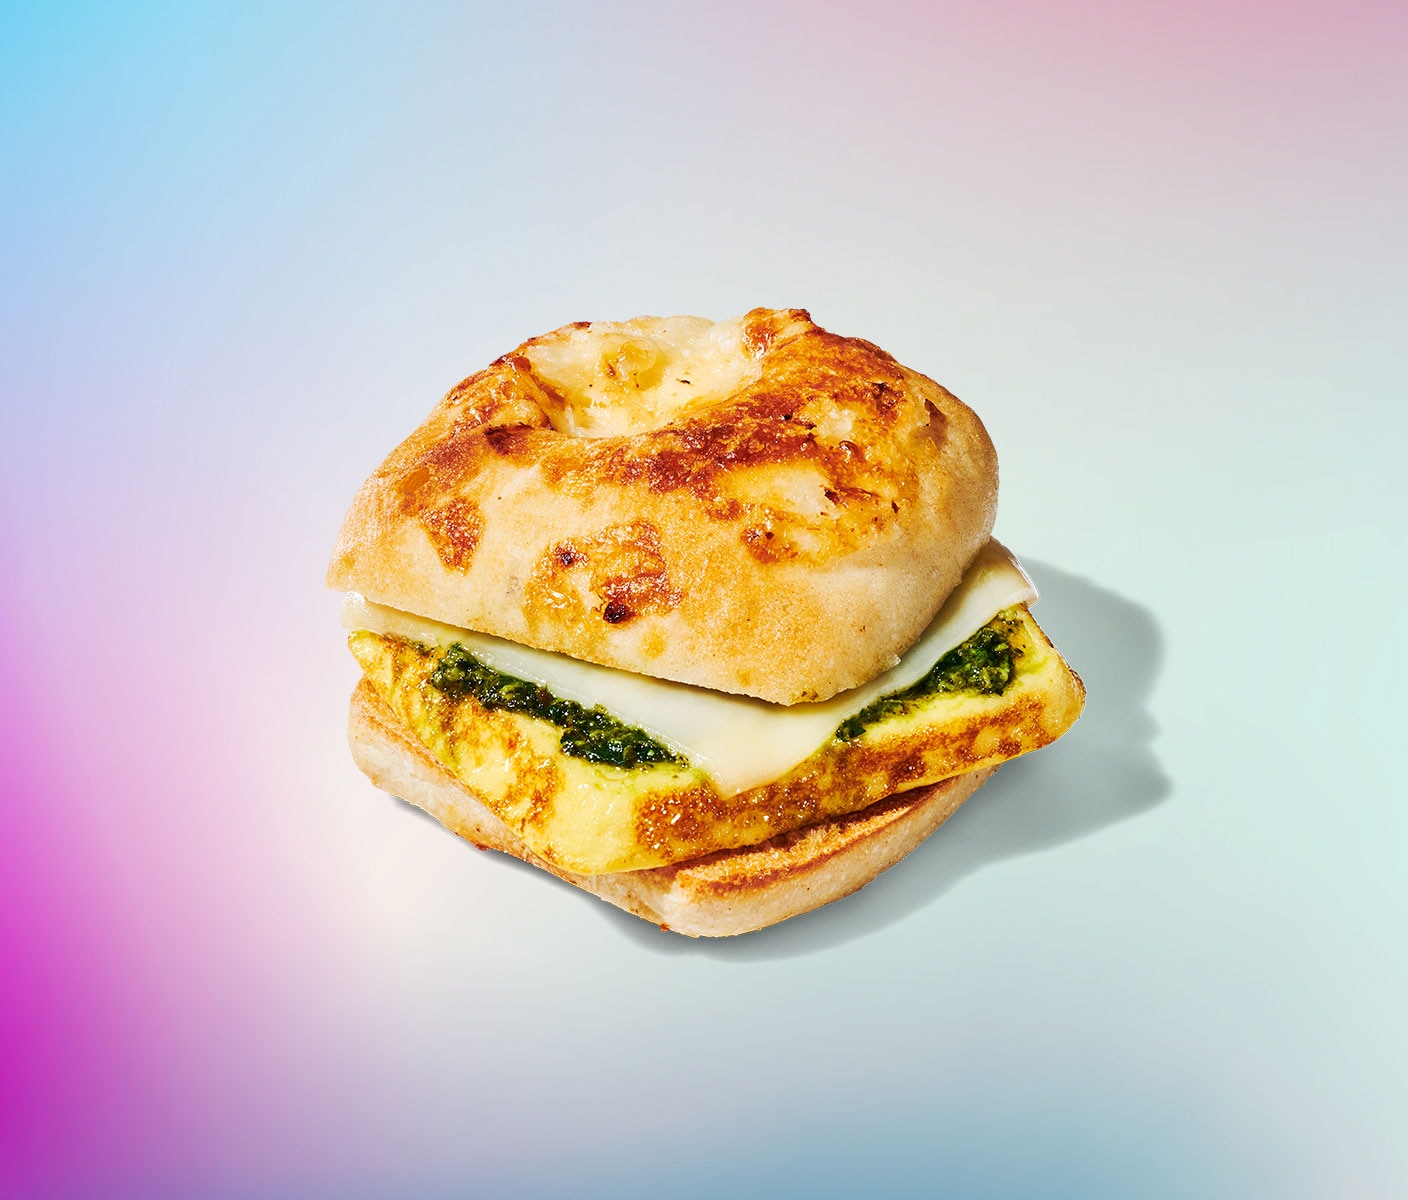 A breakfast sandwich with a fluffy egg frittata and a spread of green pesto sauce.